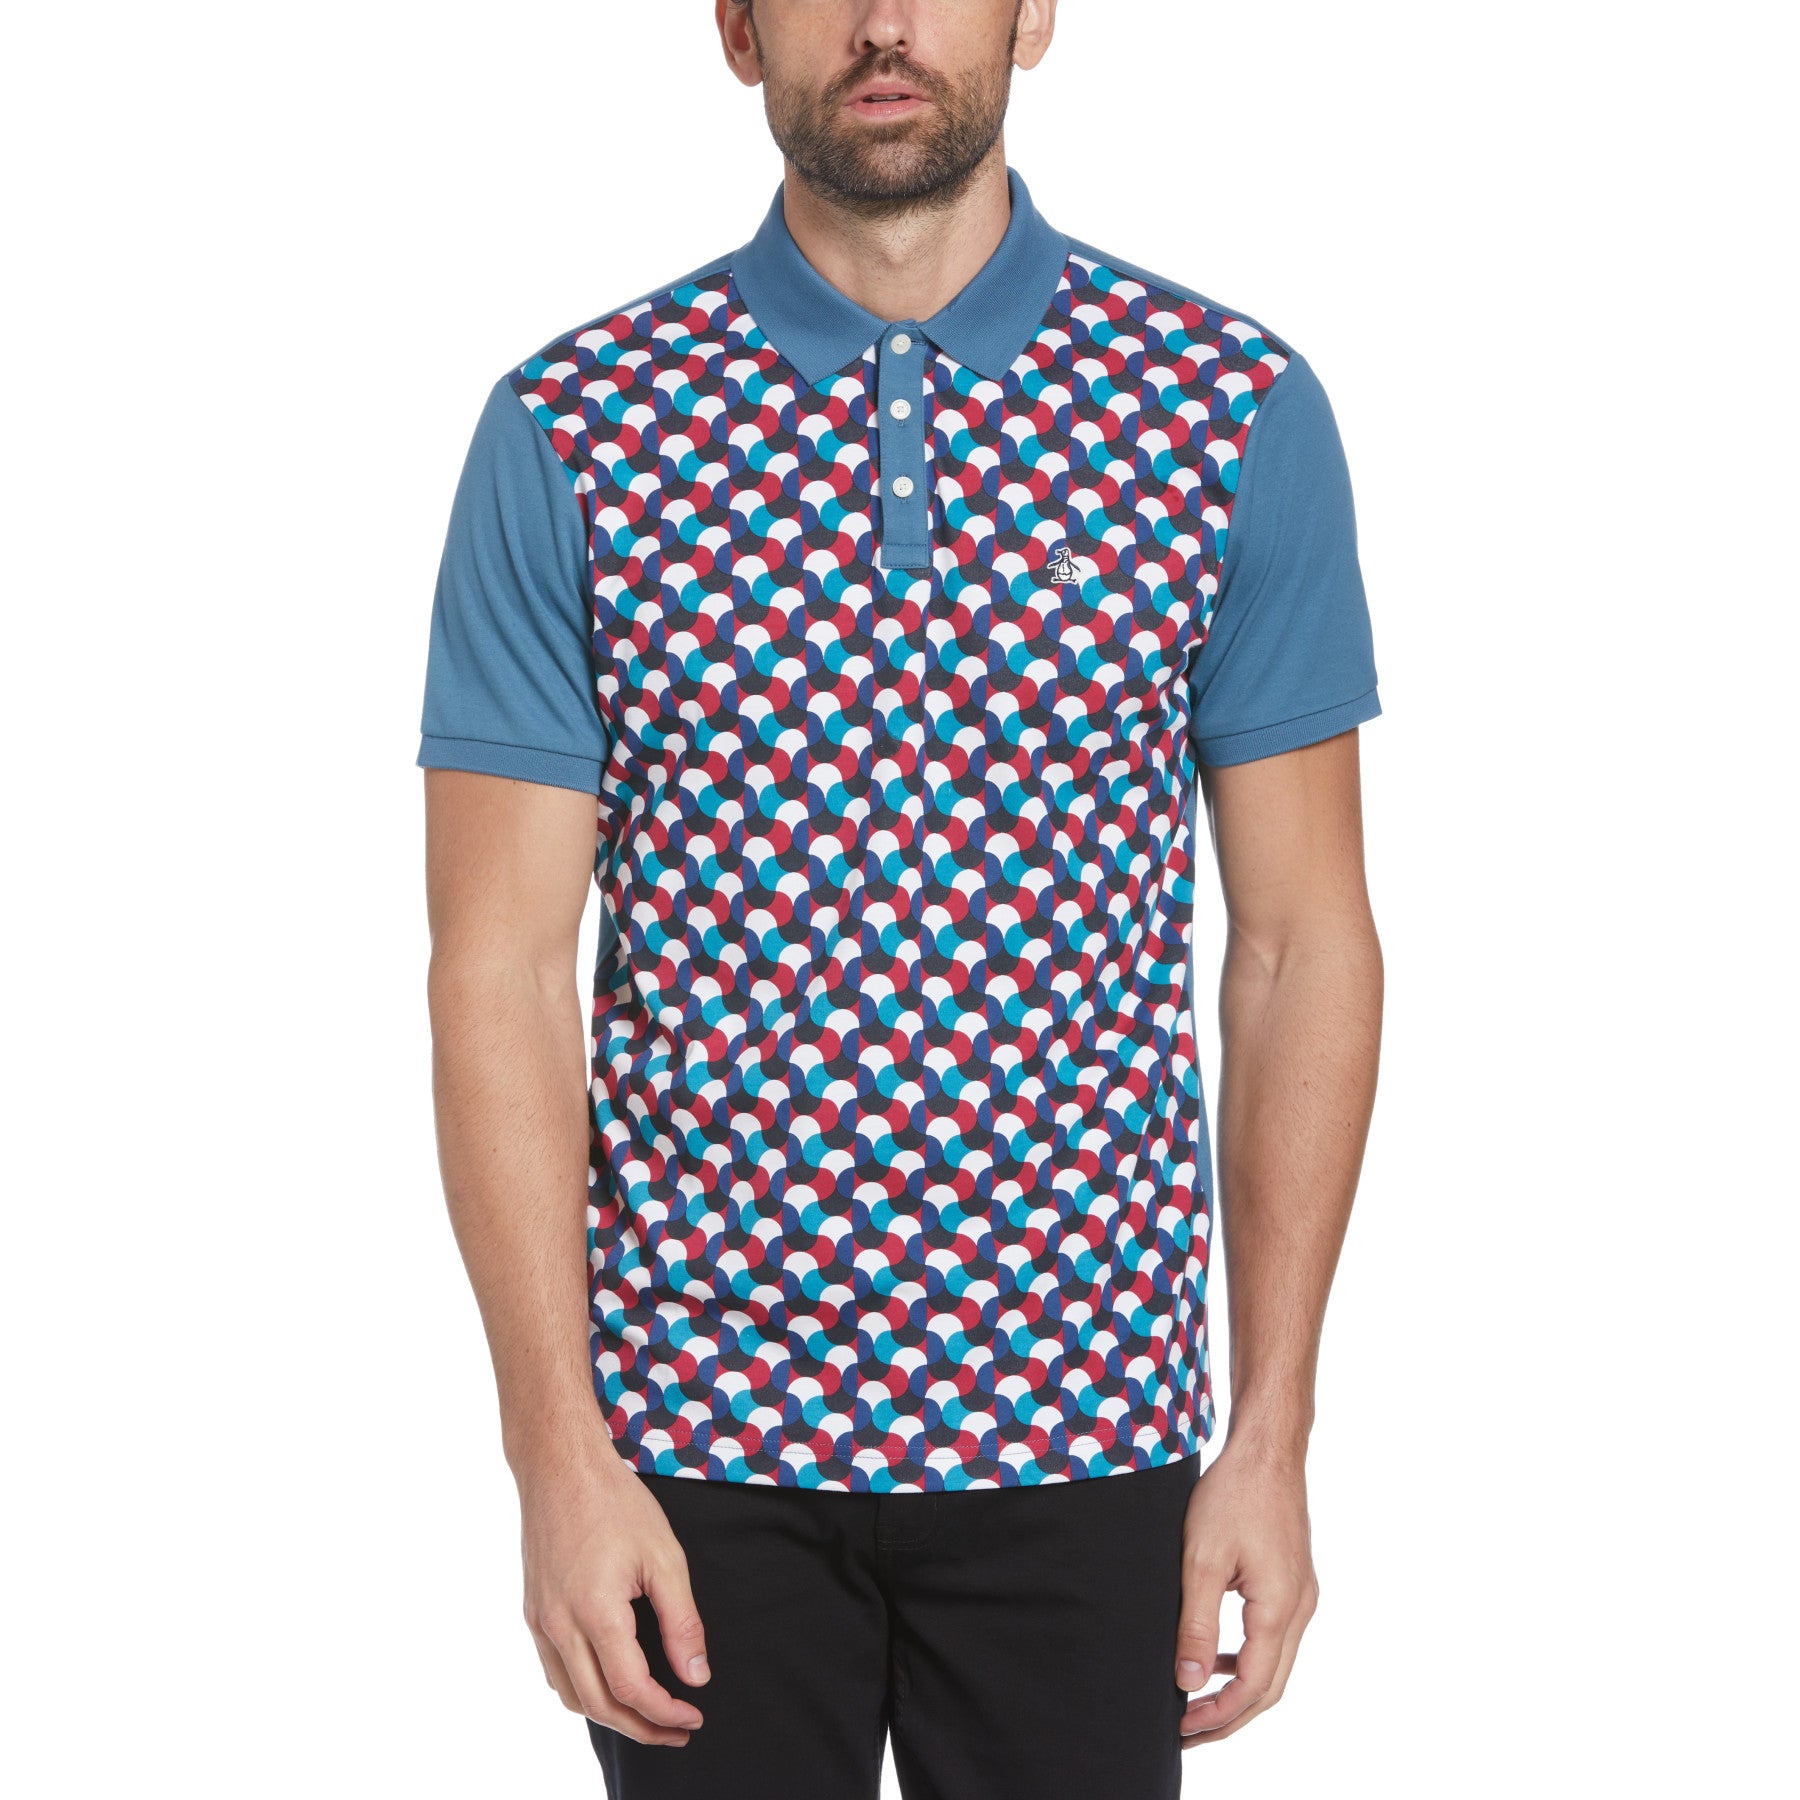 View Premium Geo Print Front Polo Shirt In Midnight information